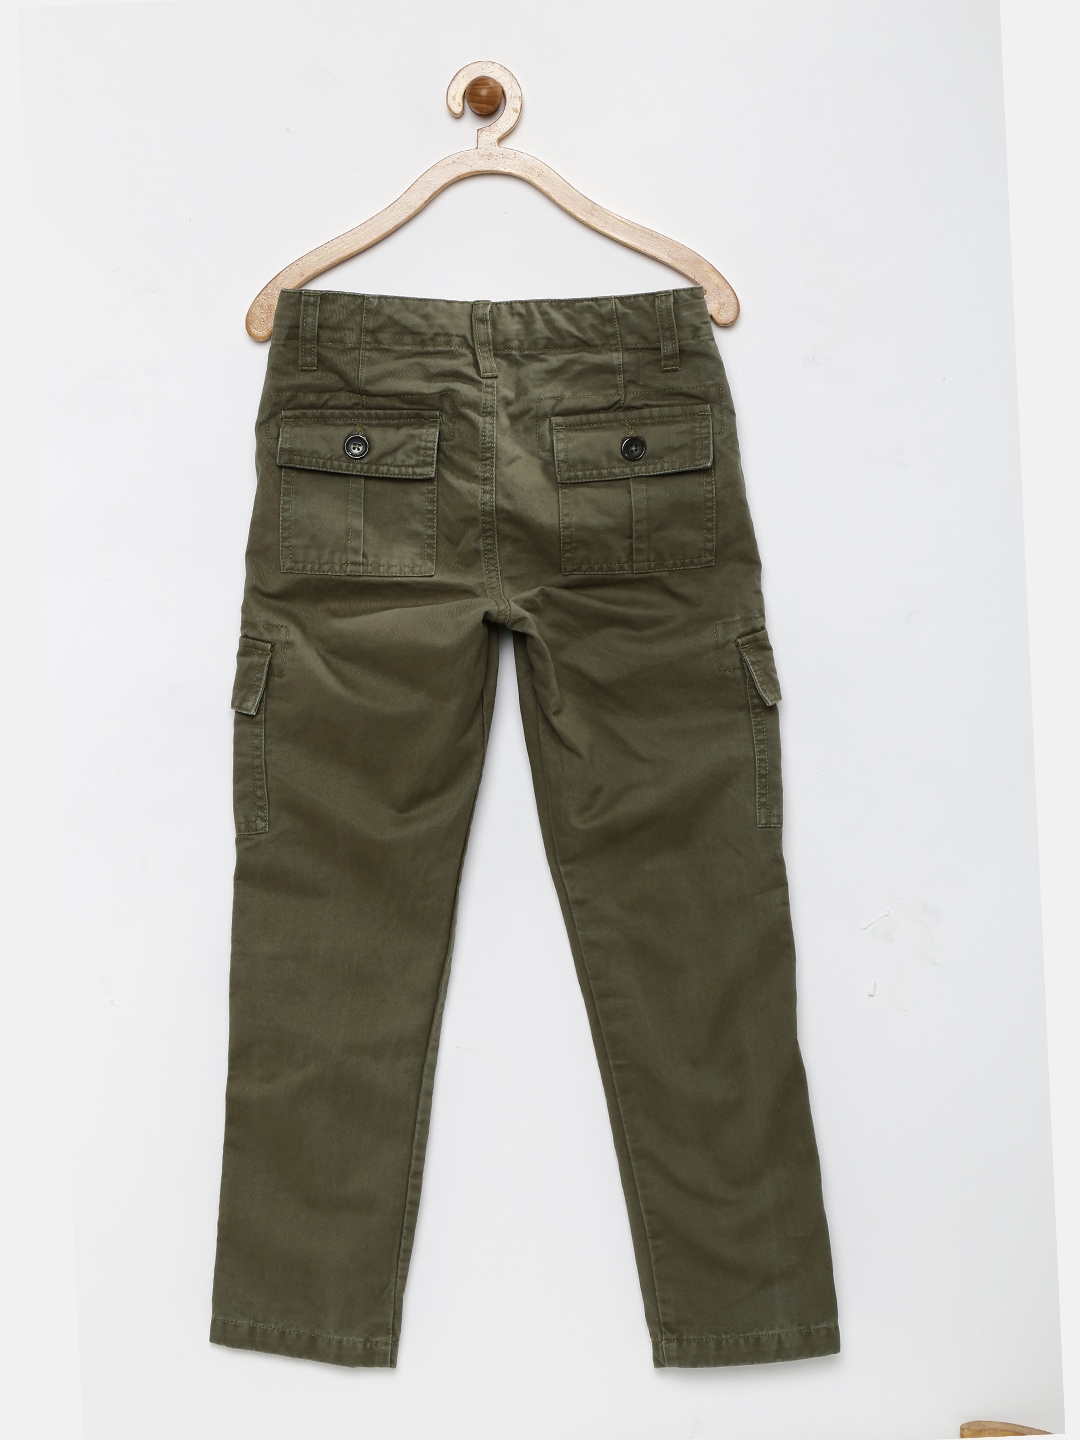 Rig O Cargo Caps Trousers - Buy Rig O Cargo Caps Trousers online ...